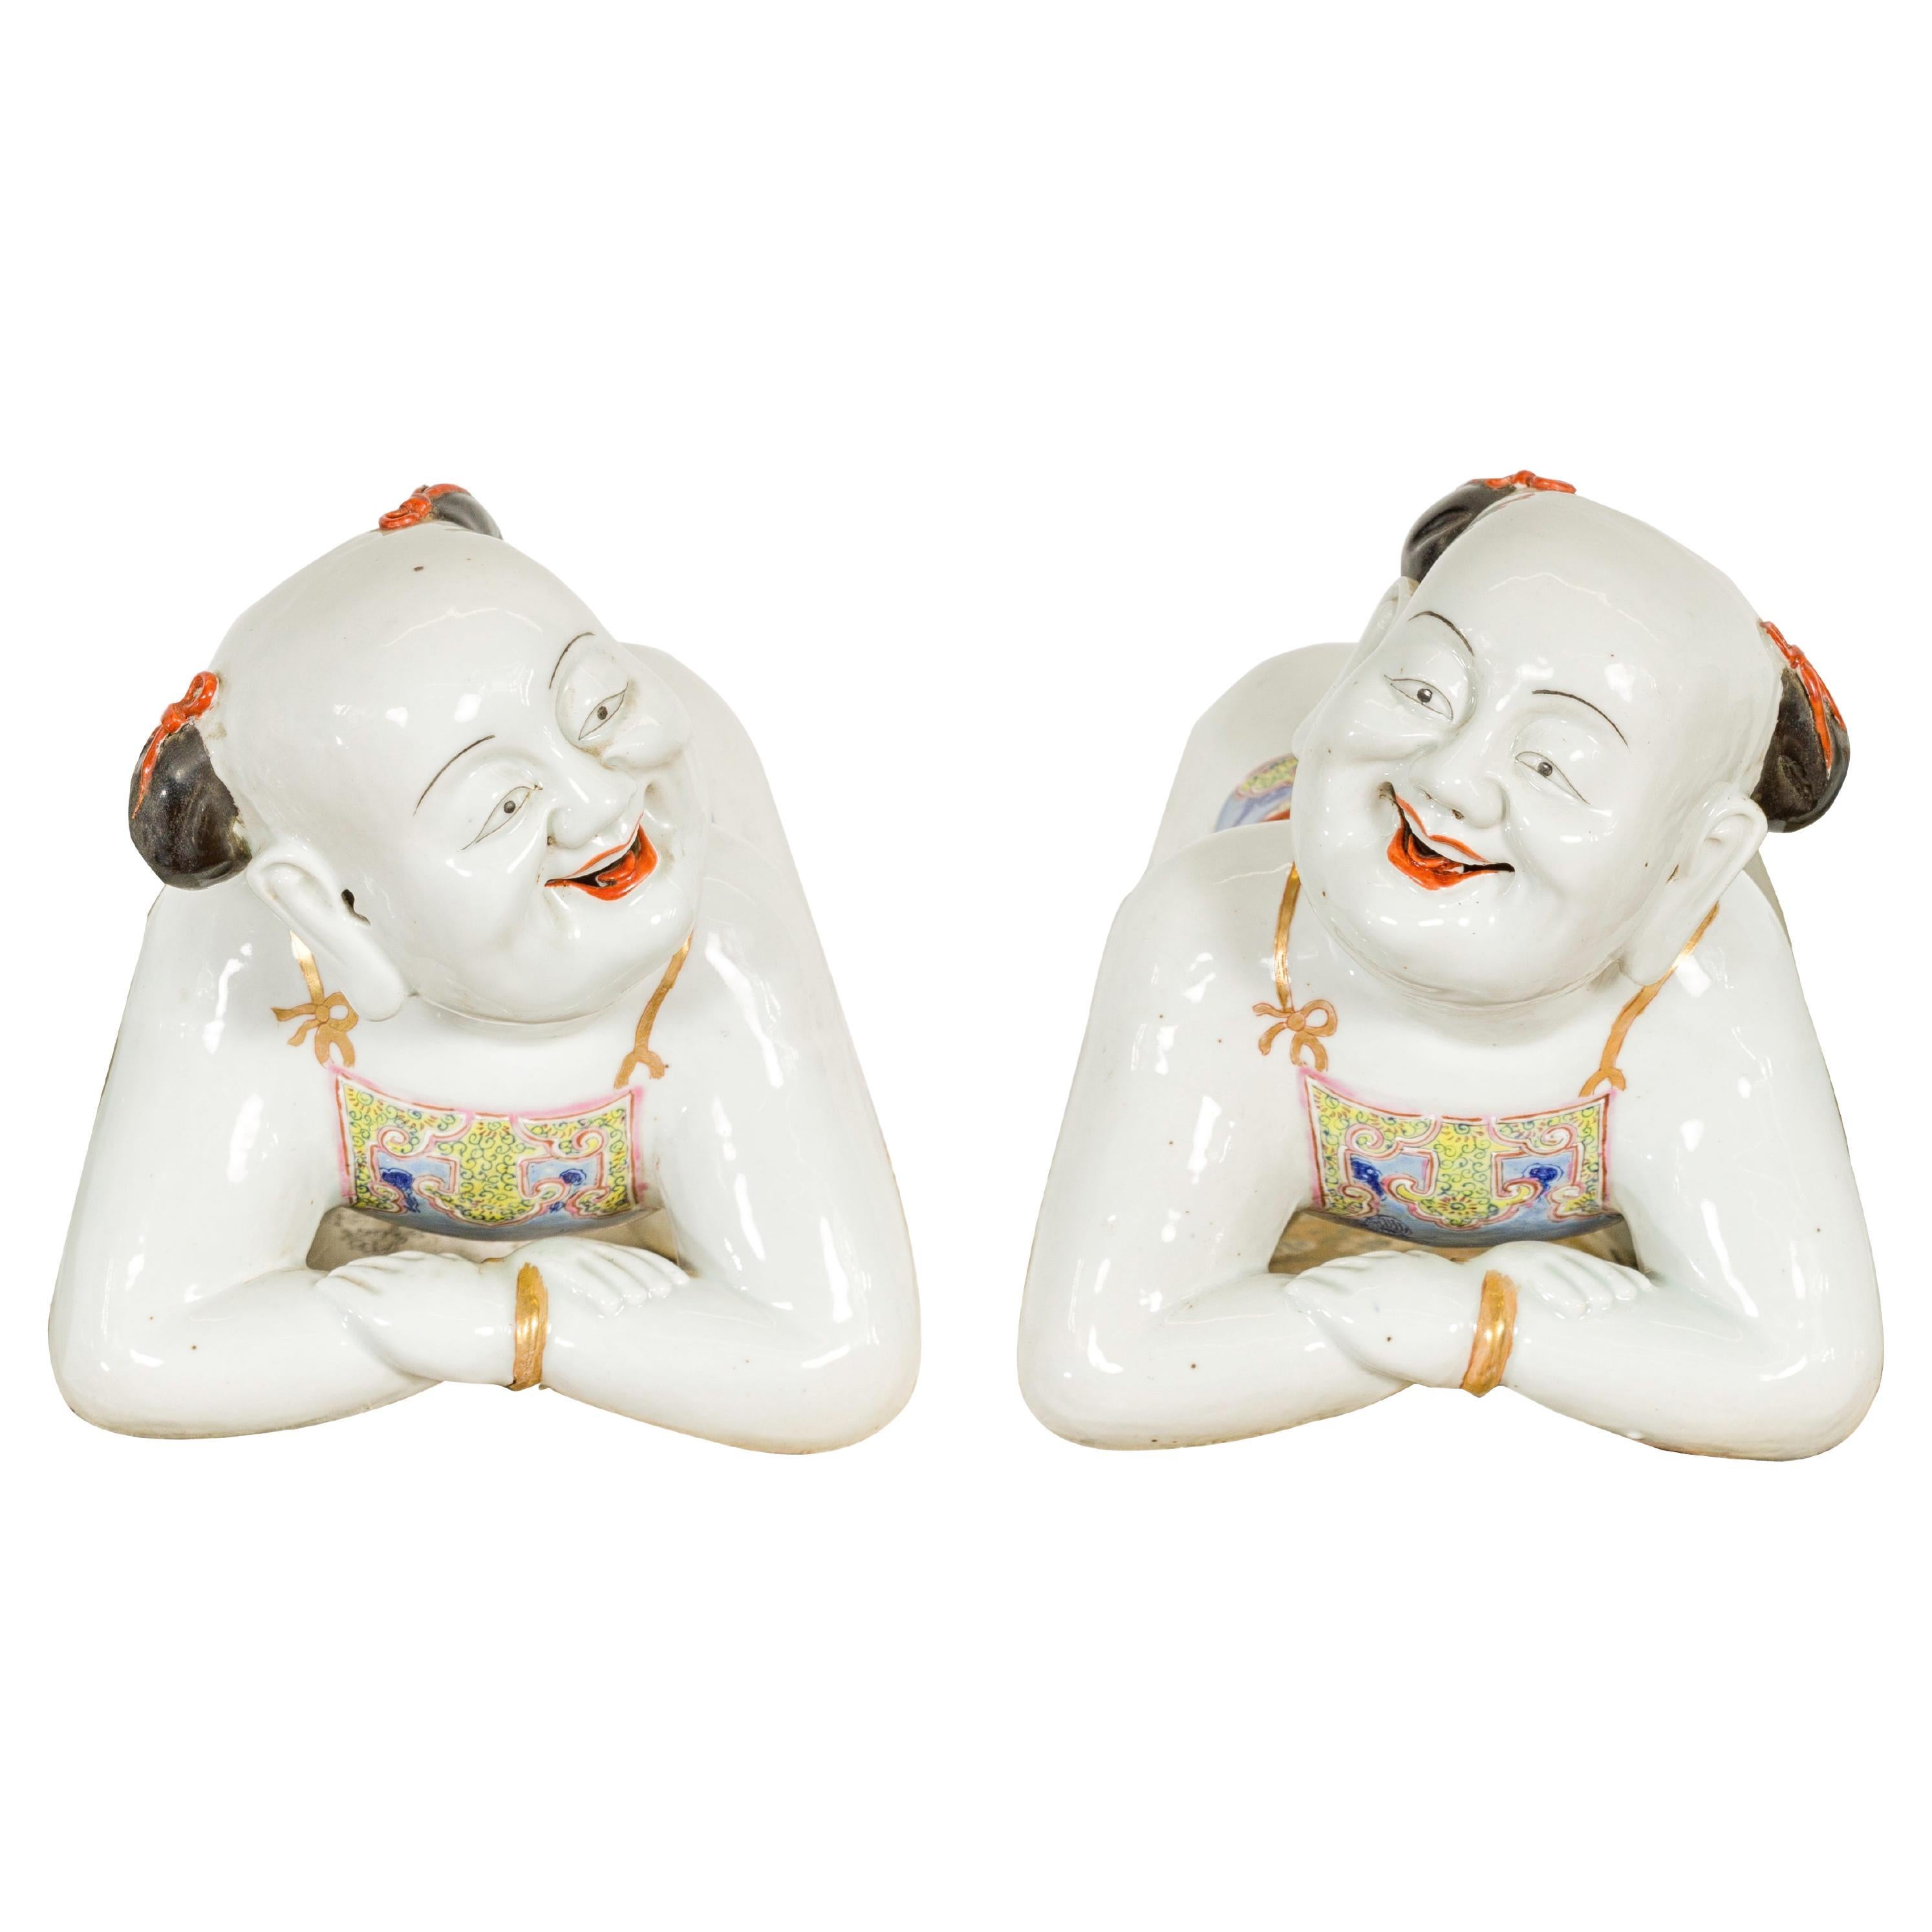 Pair of Qing Dynasty Period Porcelain Tong'zi Pillows Depicting Kneeling Boys